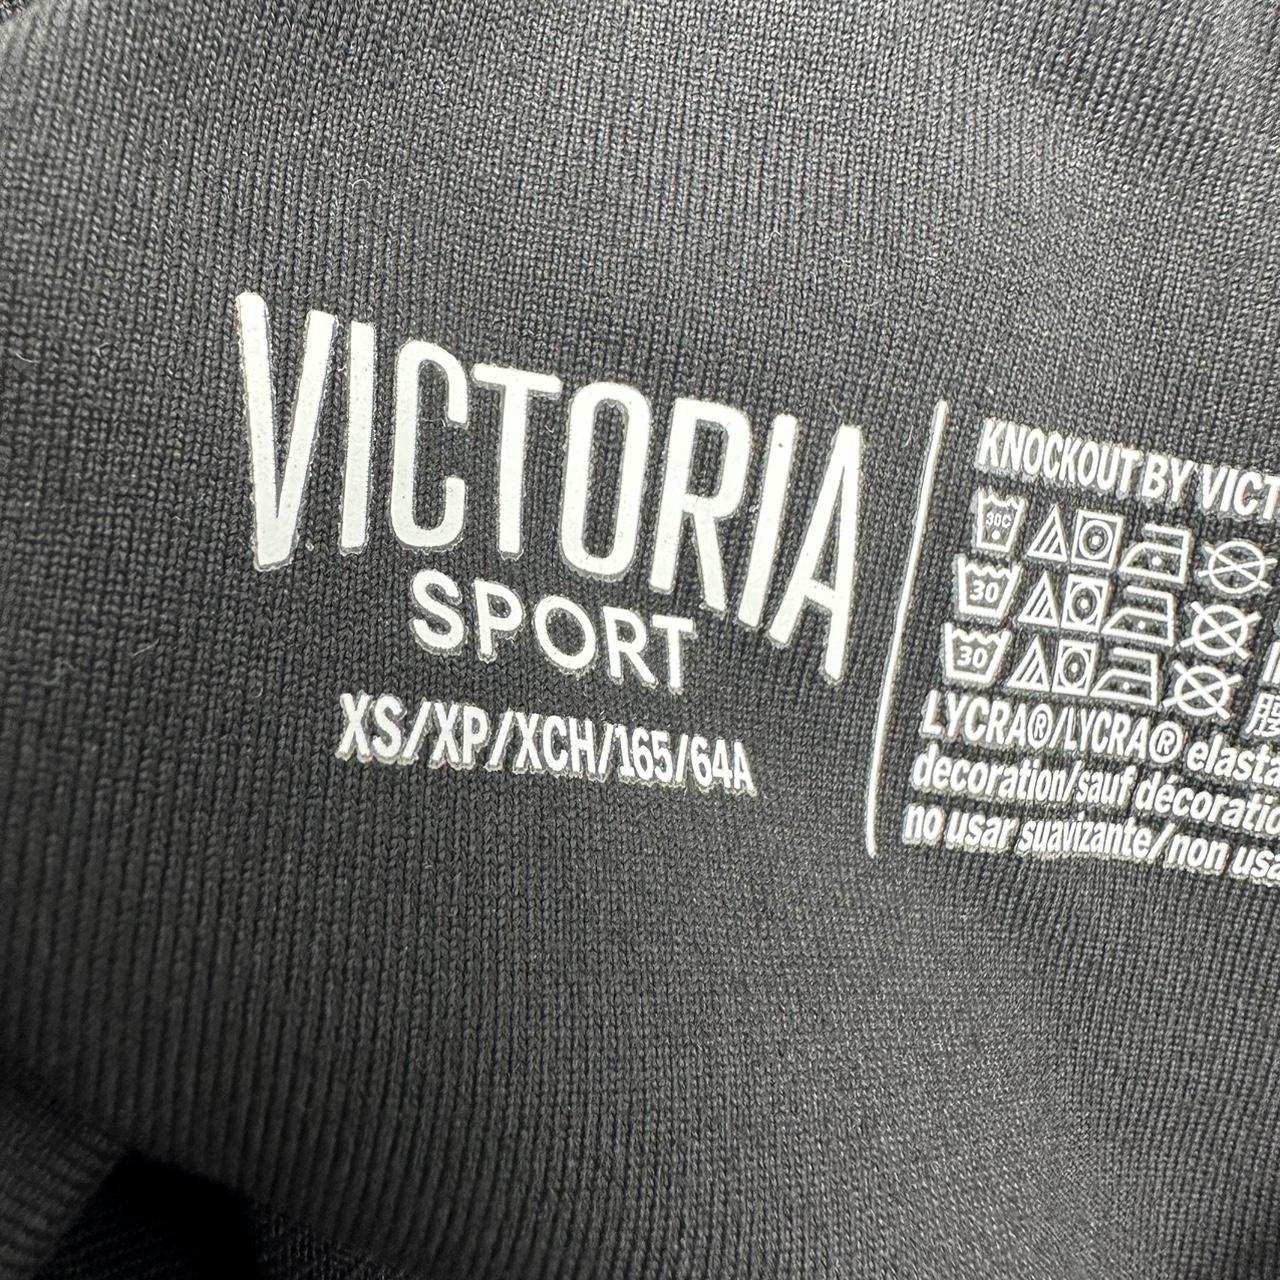 Victoria Sport XS Blue Knockout Out by Victoria - Depop